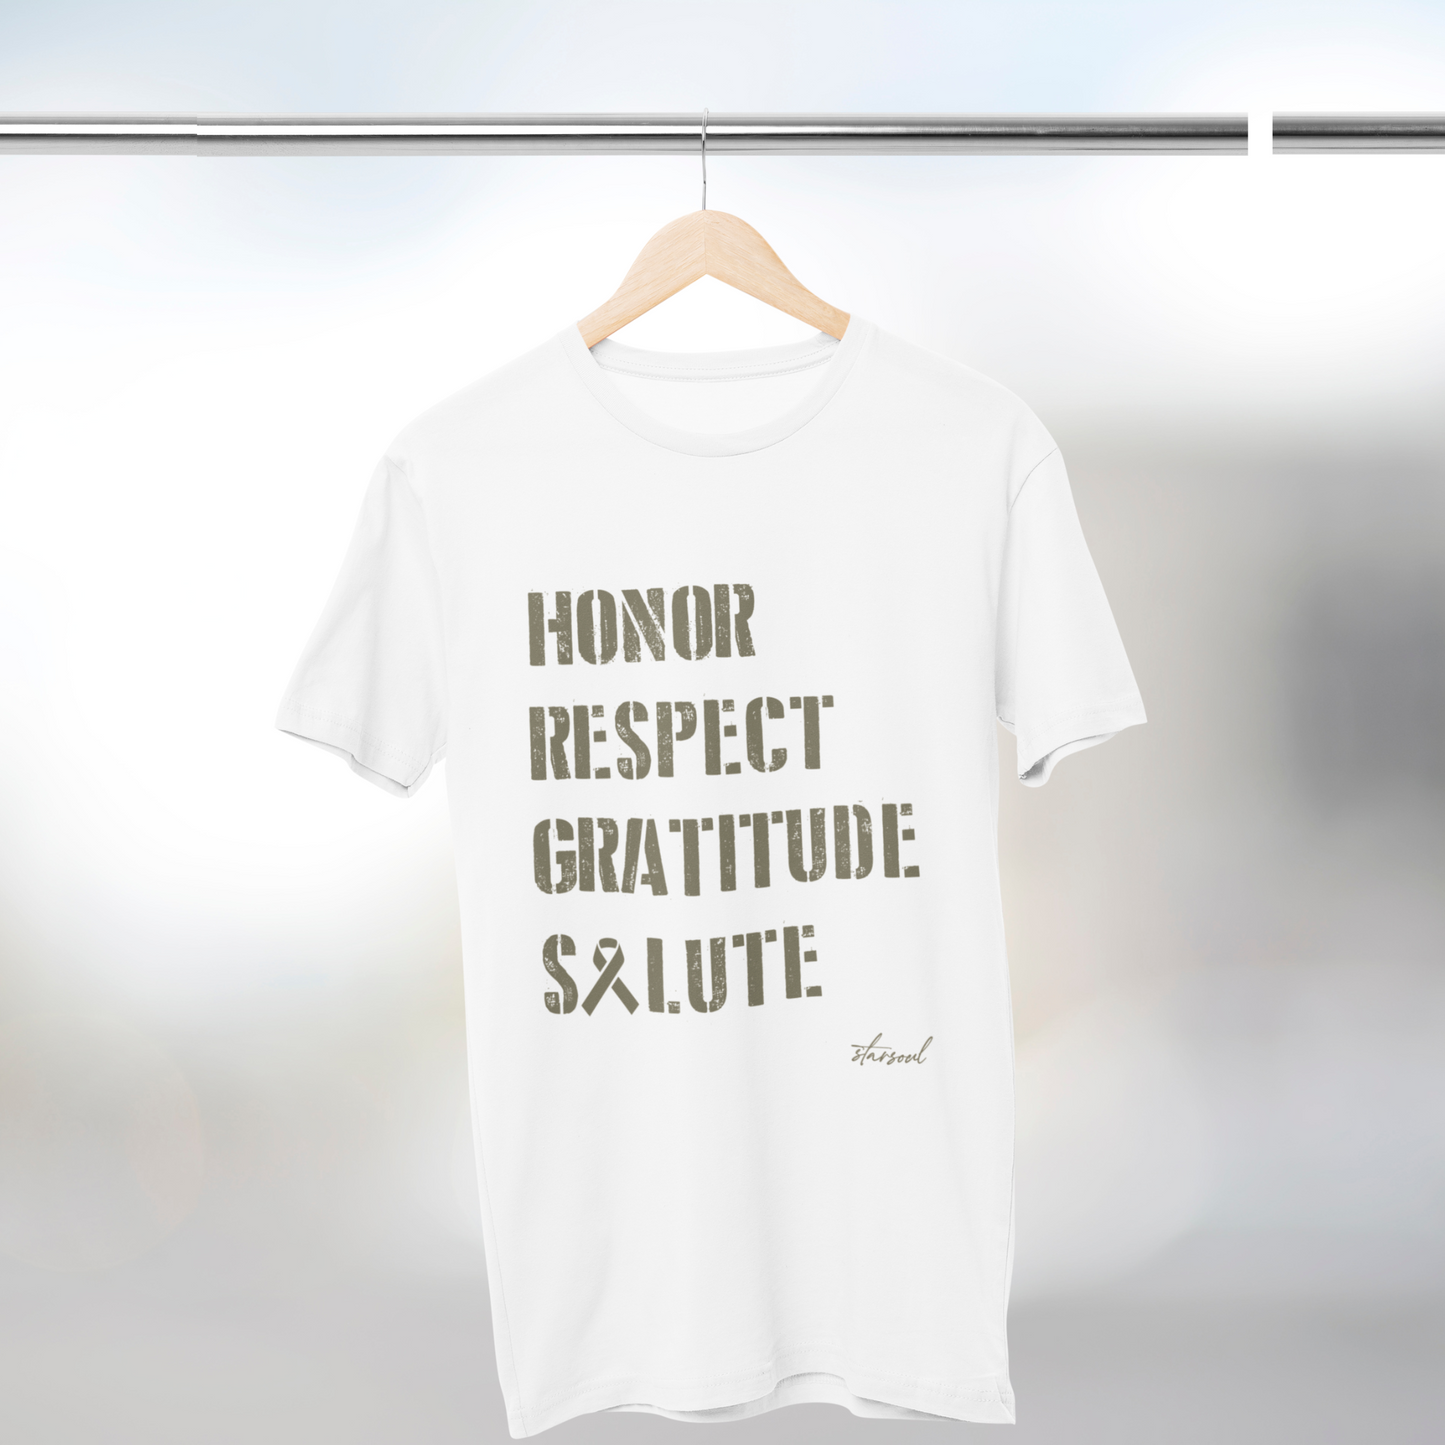 Veteran charity t-shirt, white with green letters that read: honor respect gratitude salute, all proceeds feed veterans in the US